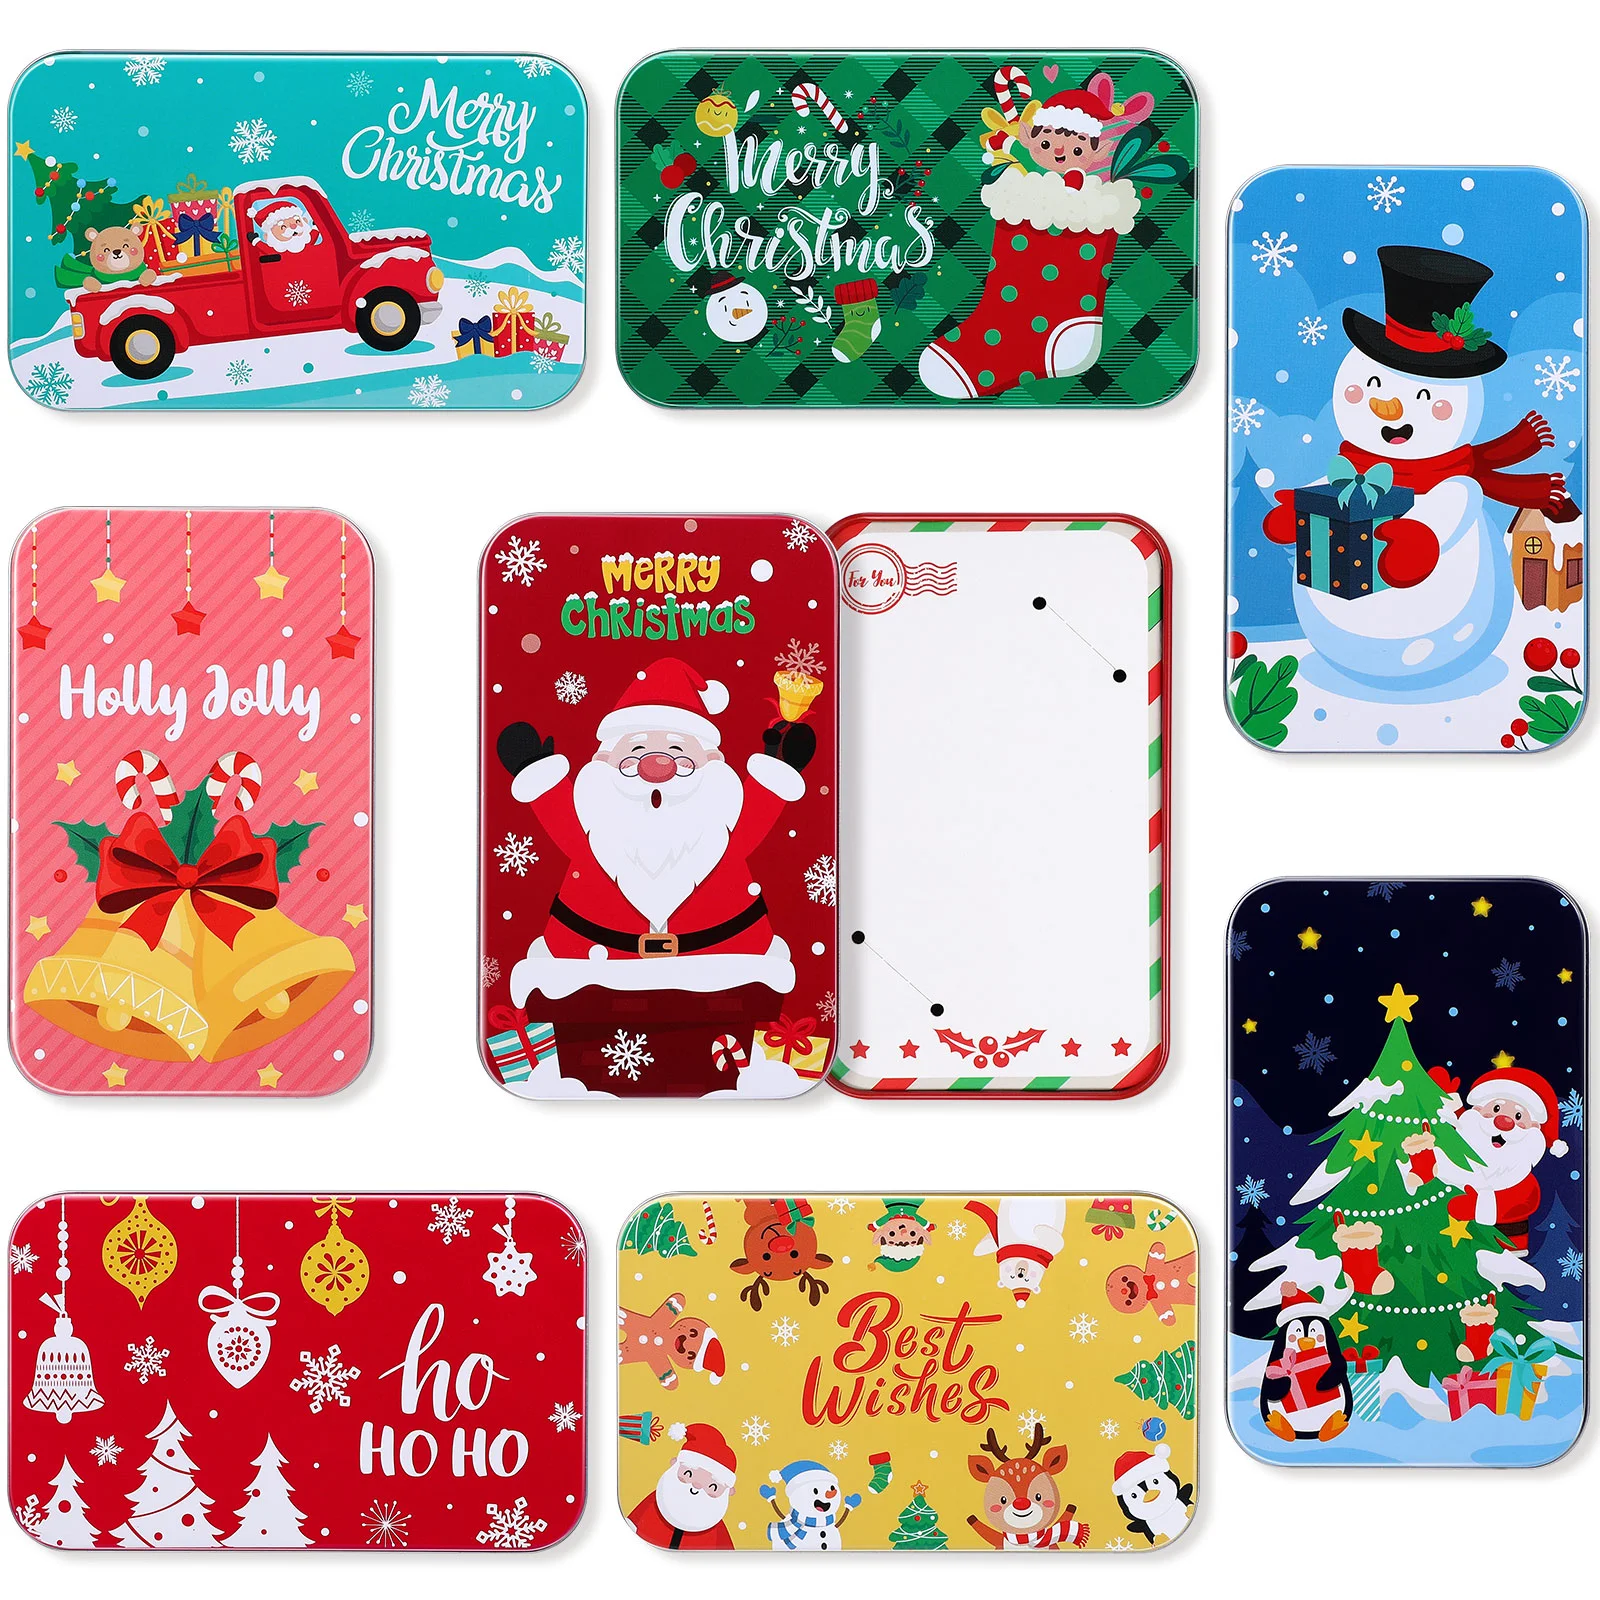 

Chrismas Tinplate Boxes Rustproof Reusable Tin Gift Cases Tinplate Boxes Biscuit Storage Boxes Treat Box Gift Packing Boxes